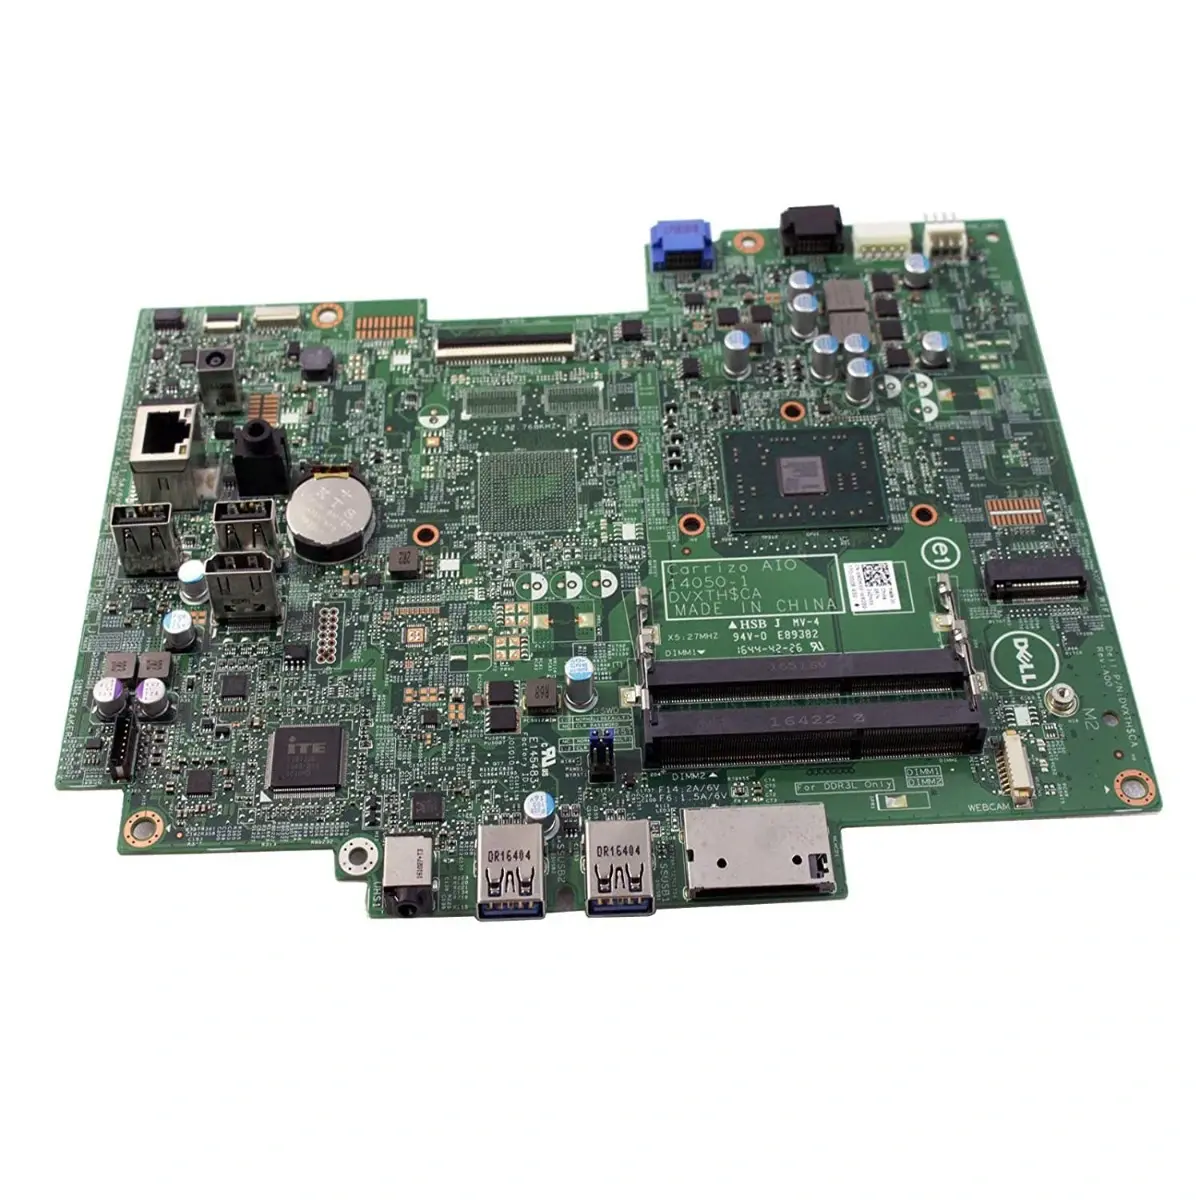 3PYWR Dell System Board AMD A8 with CPU Inspiron 24 345...